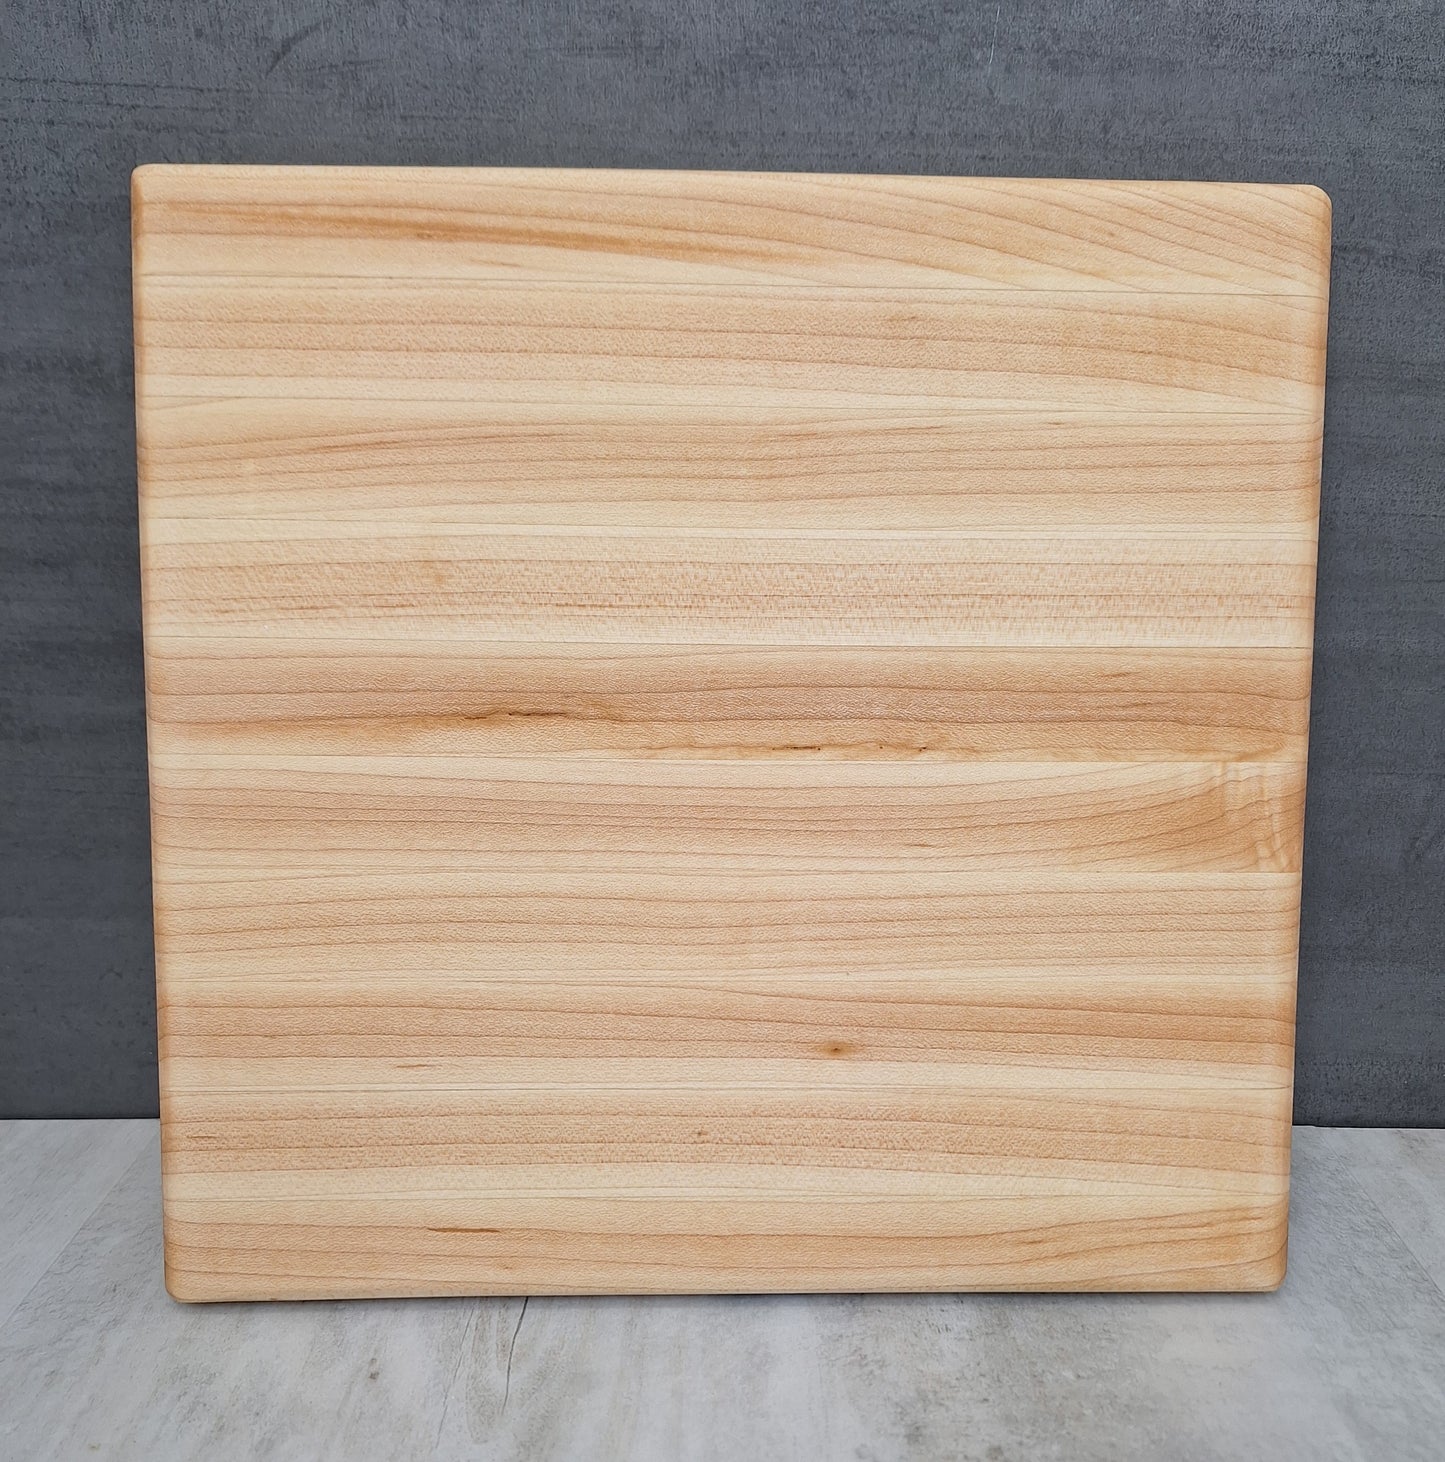 Snacker/Square Wooden Cutting Board